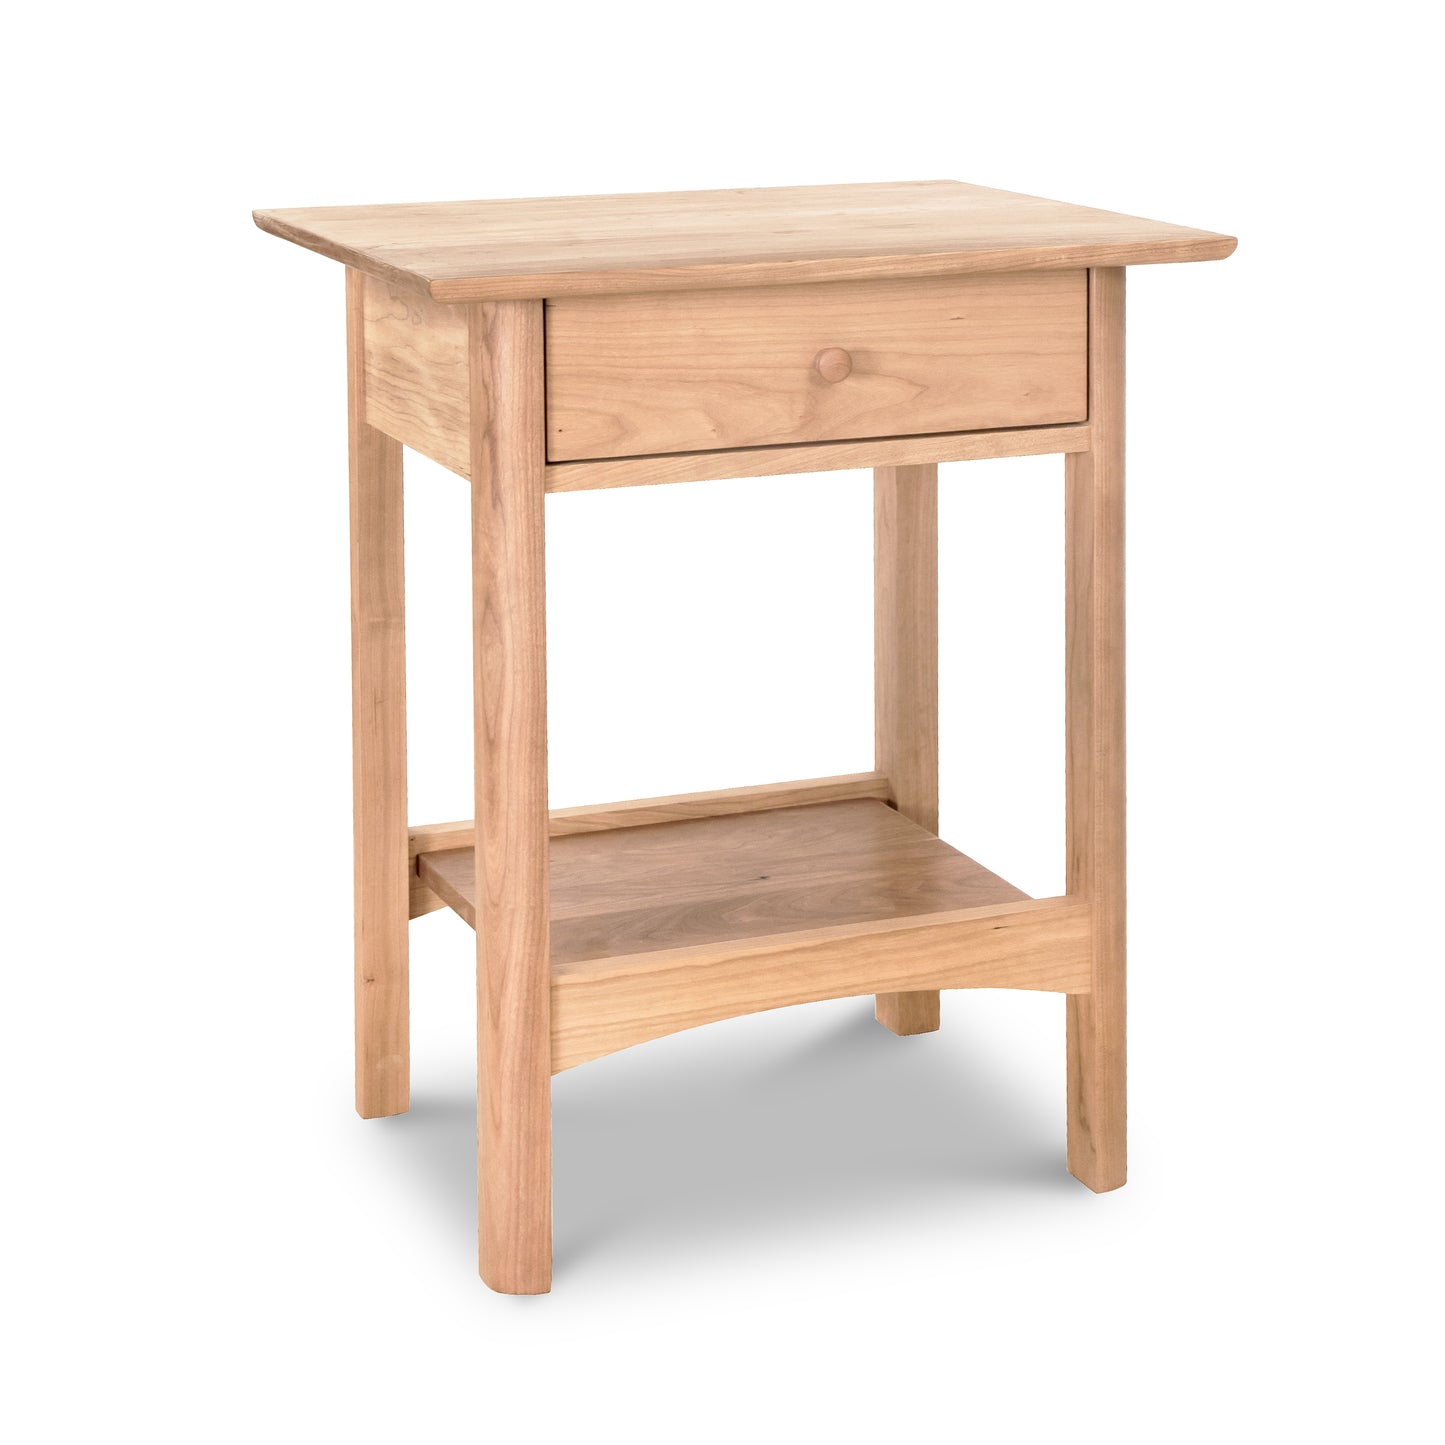 Vermont Furniture Designs Heartwood Shaker 1-Drawer Open Shelf Nightstand, solid wood with a single drawer and lower shelf, isolated on a white background.